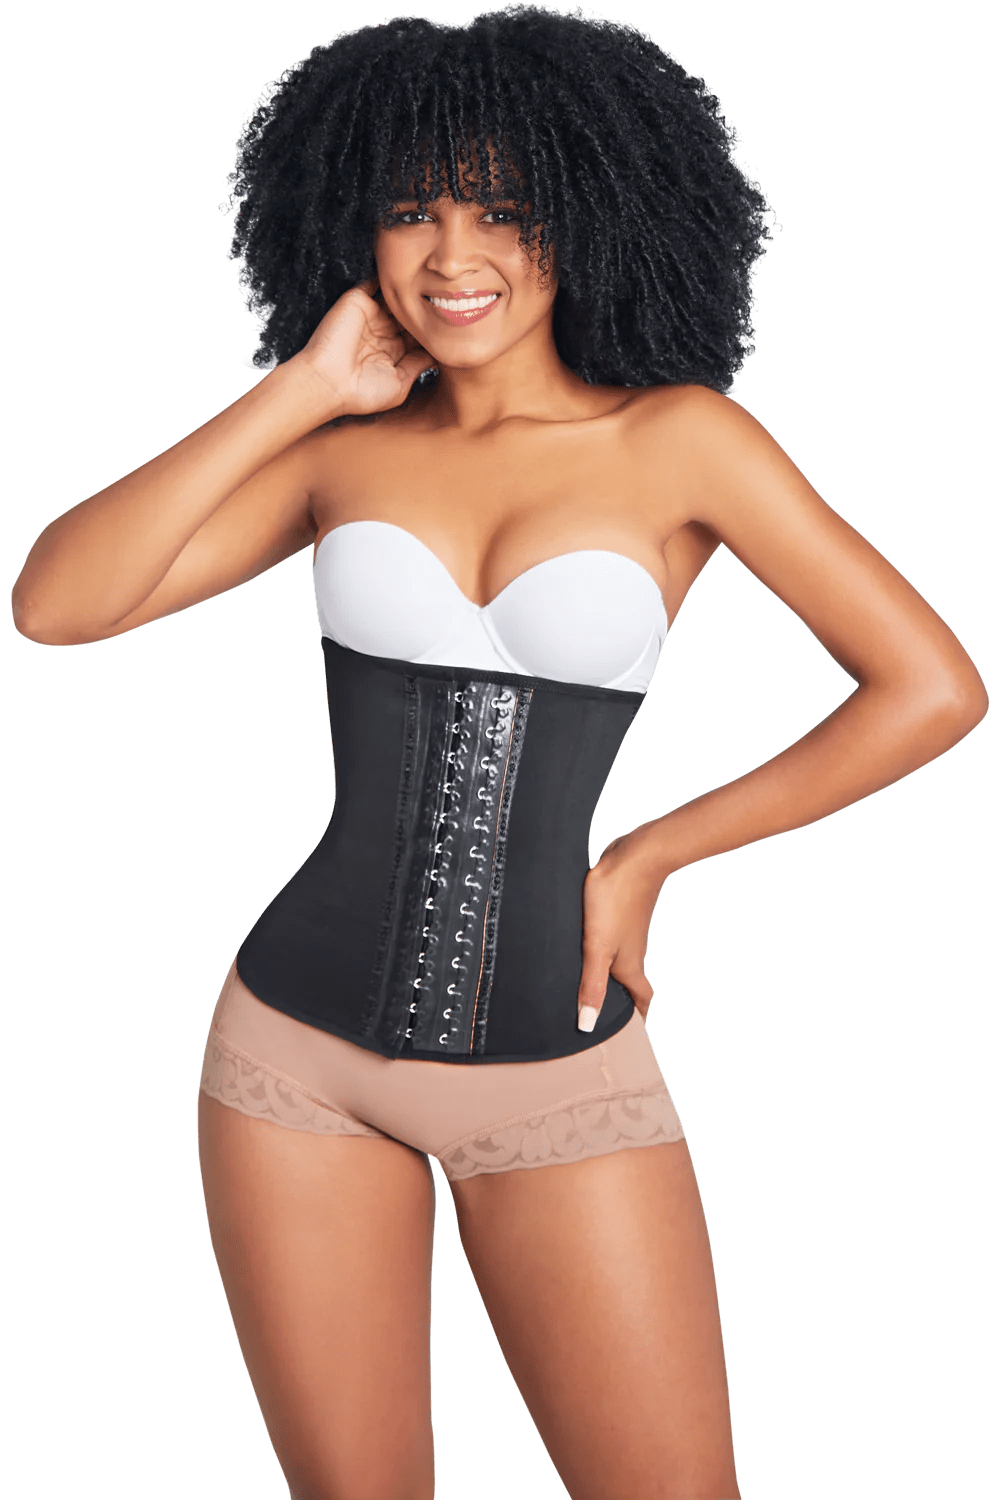 Ily Clothing Shapwear Colombian Latex Waist Trainer